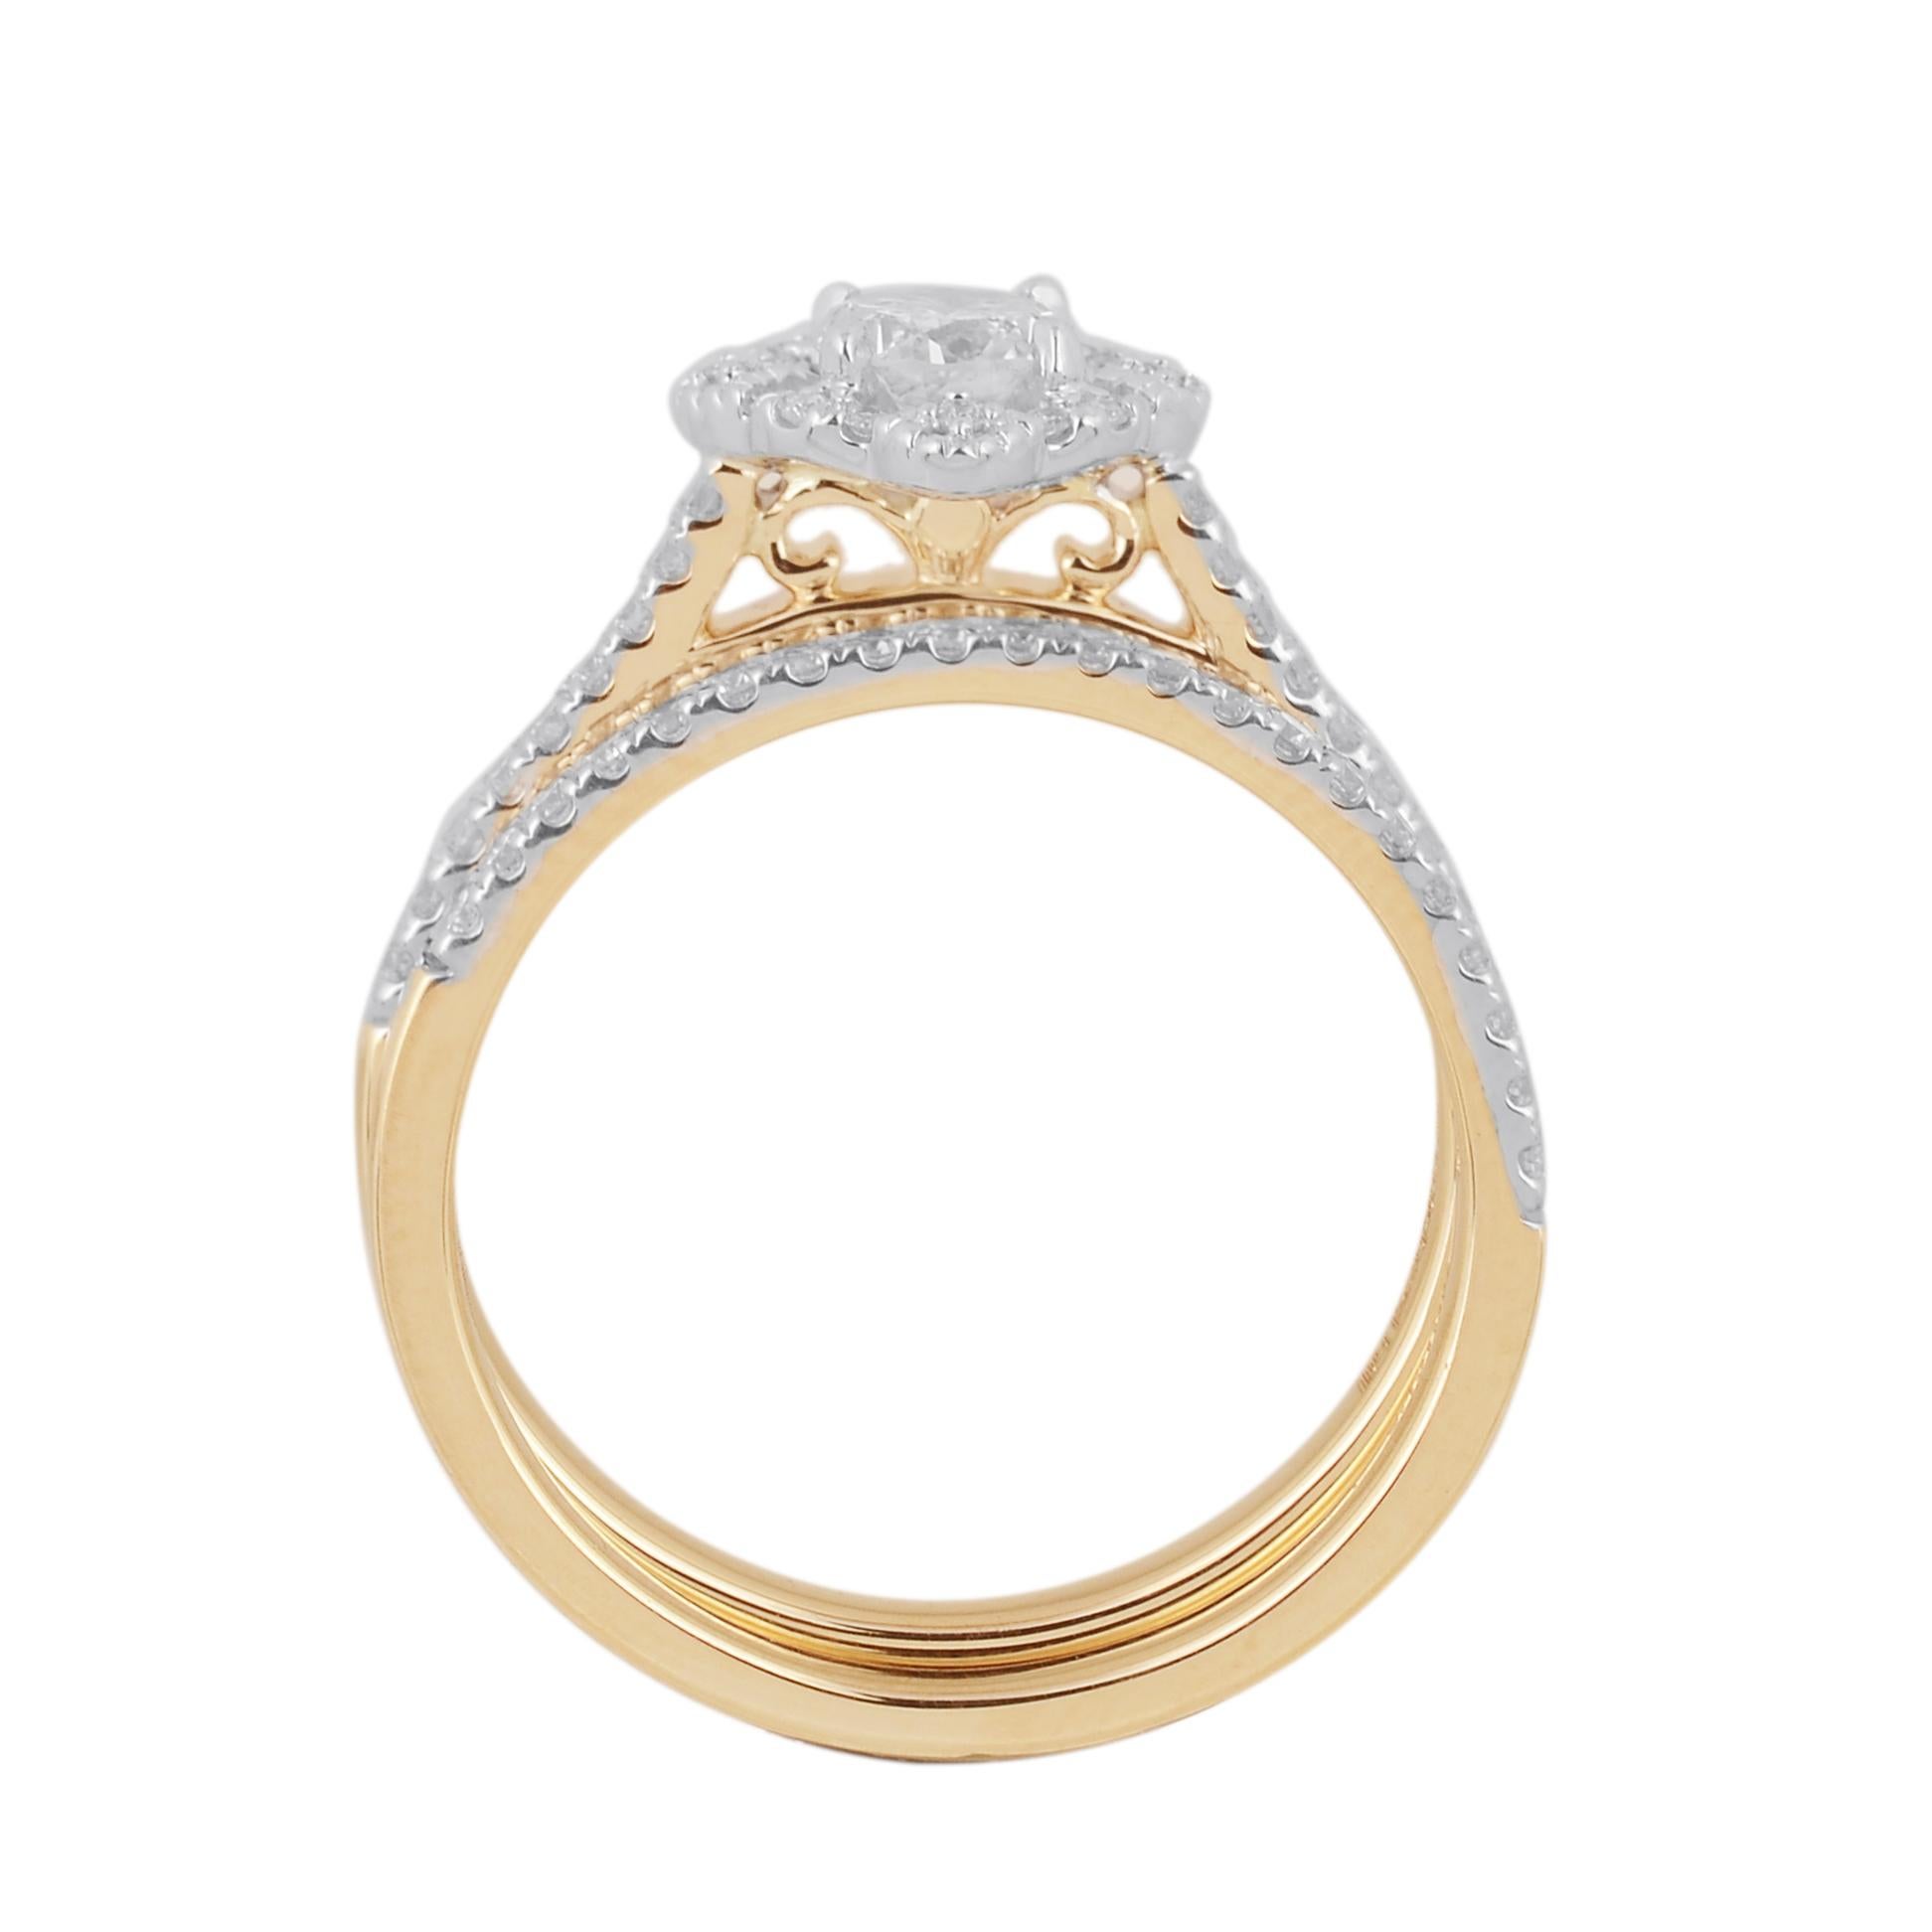 Exquisite 18 karat yellow gold floral engagement ring featuring 0.42 ct centre stone and 0.33 ct of diamond frame, lined diamonds on shank and engagement band. This ring is superbly detailed to perfection and set with 64 brilliant-cut round diamonds